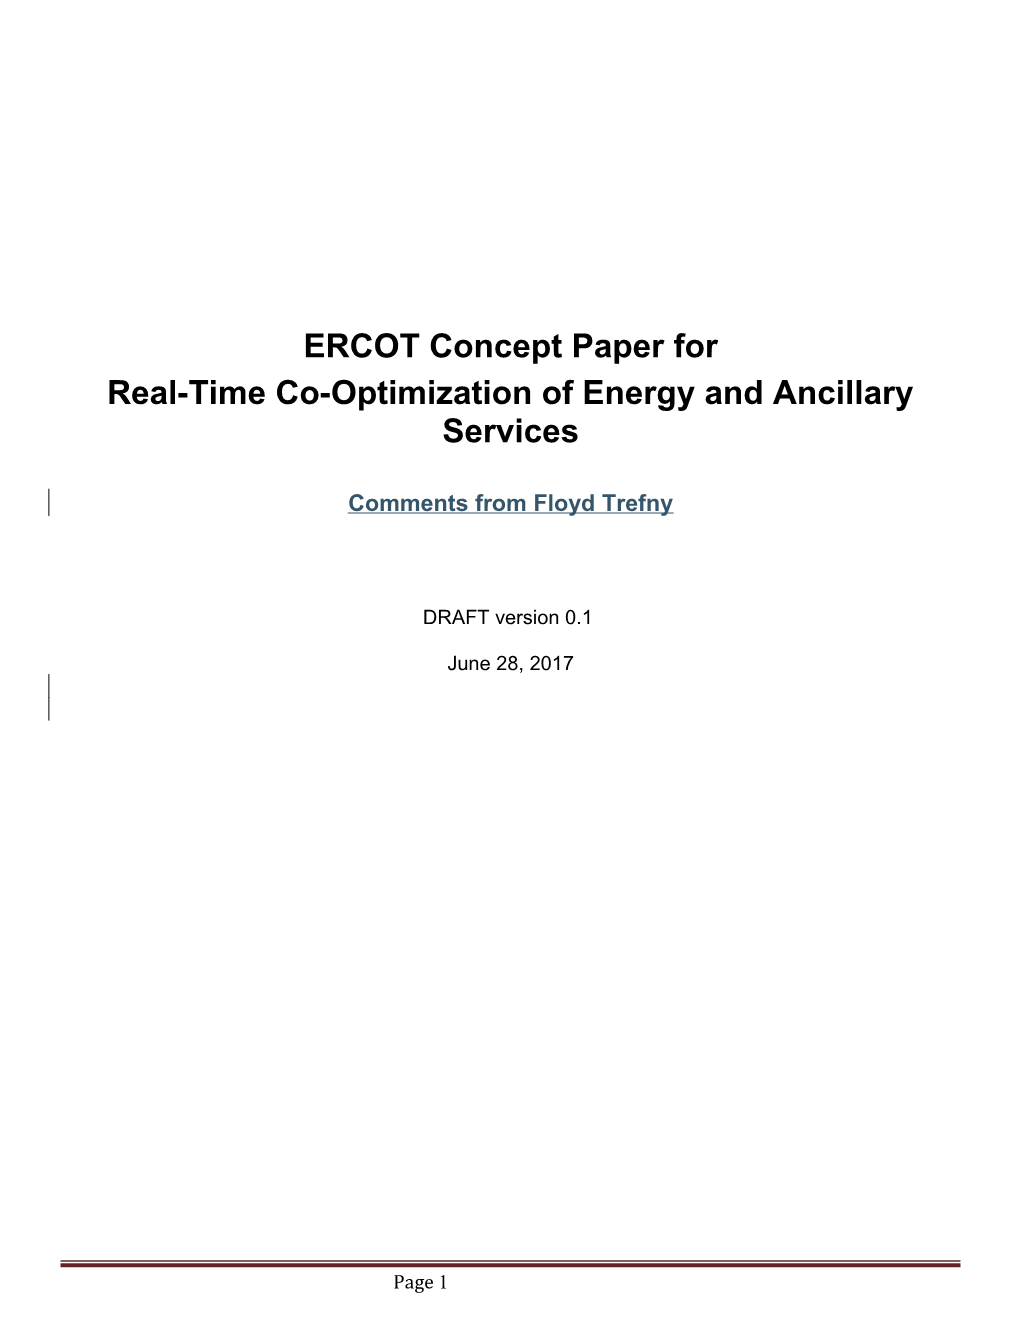 Real-Time Co-Optimization of Energy and Ancillary Services